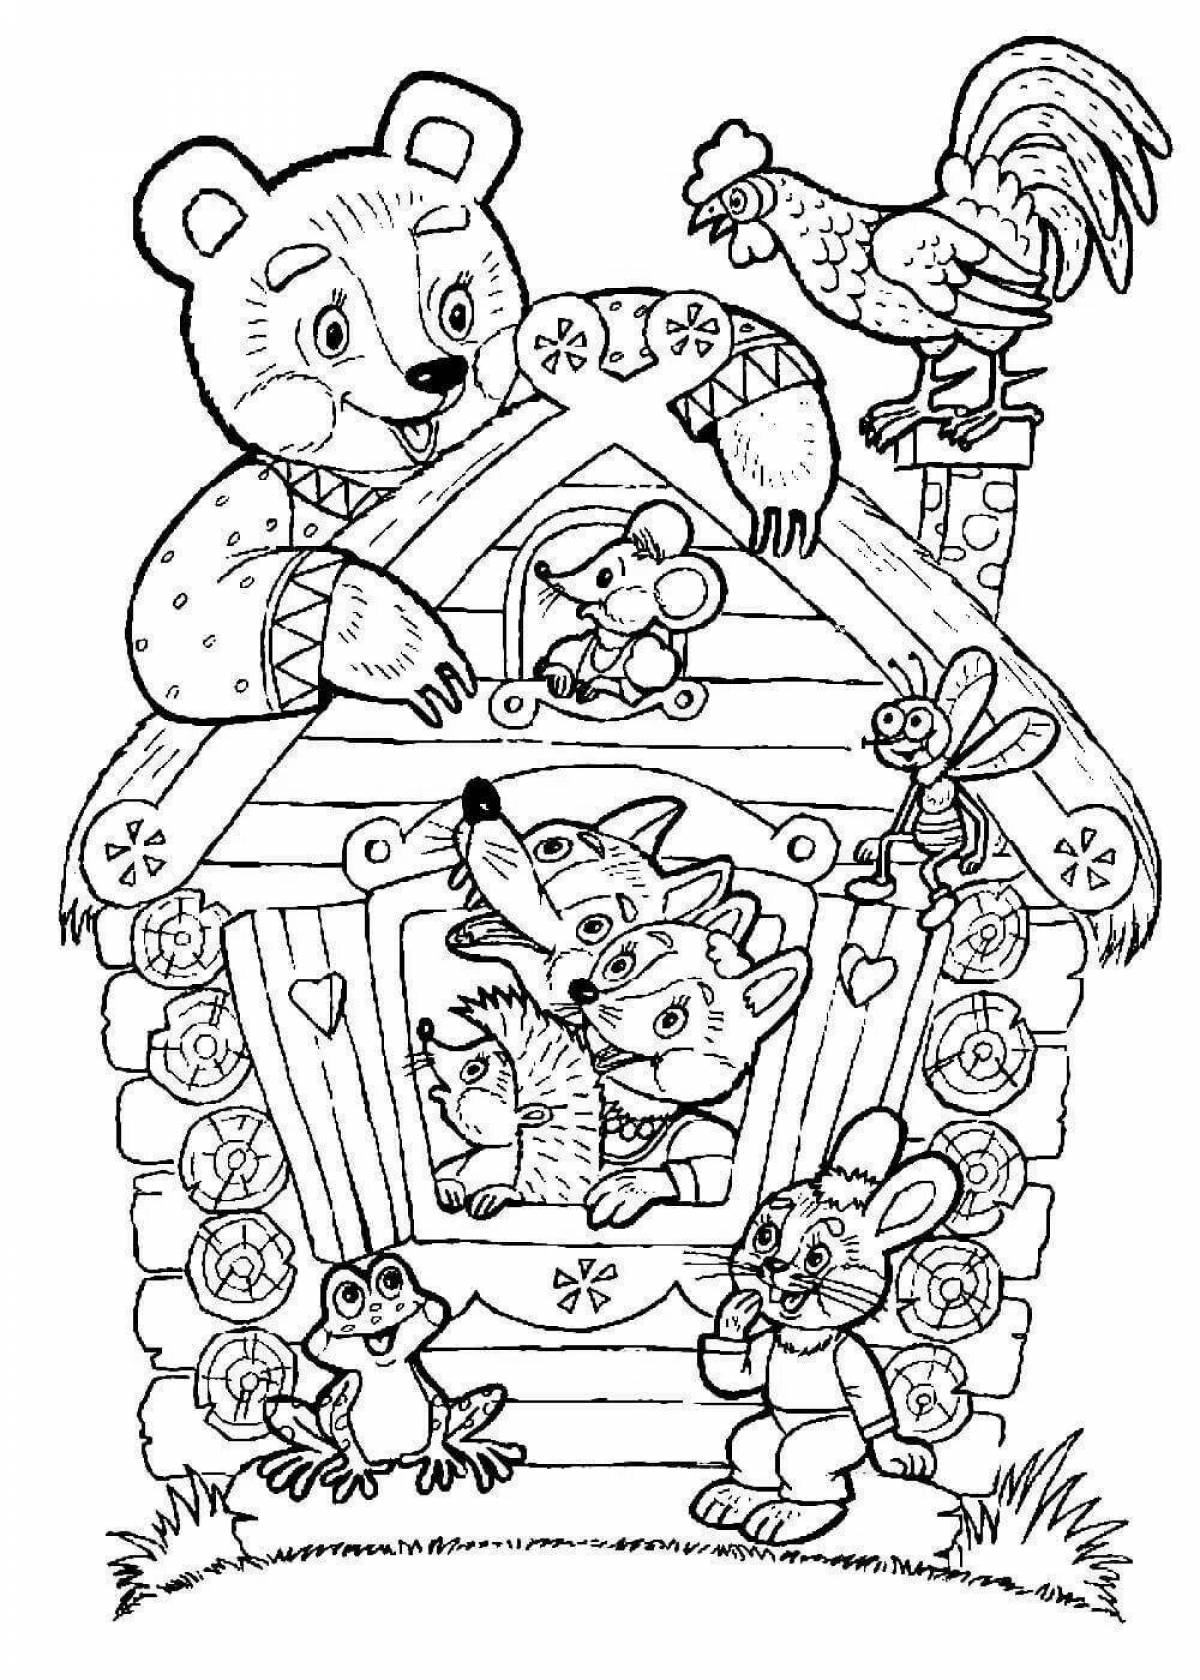 Great fairy tale coloring book for kids